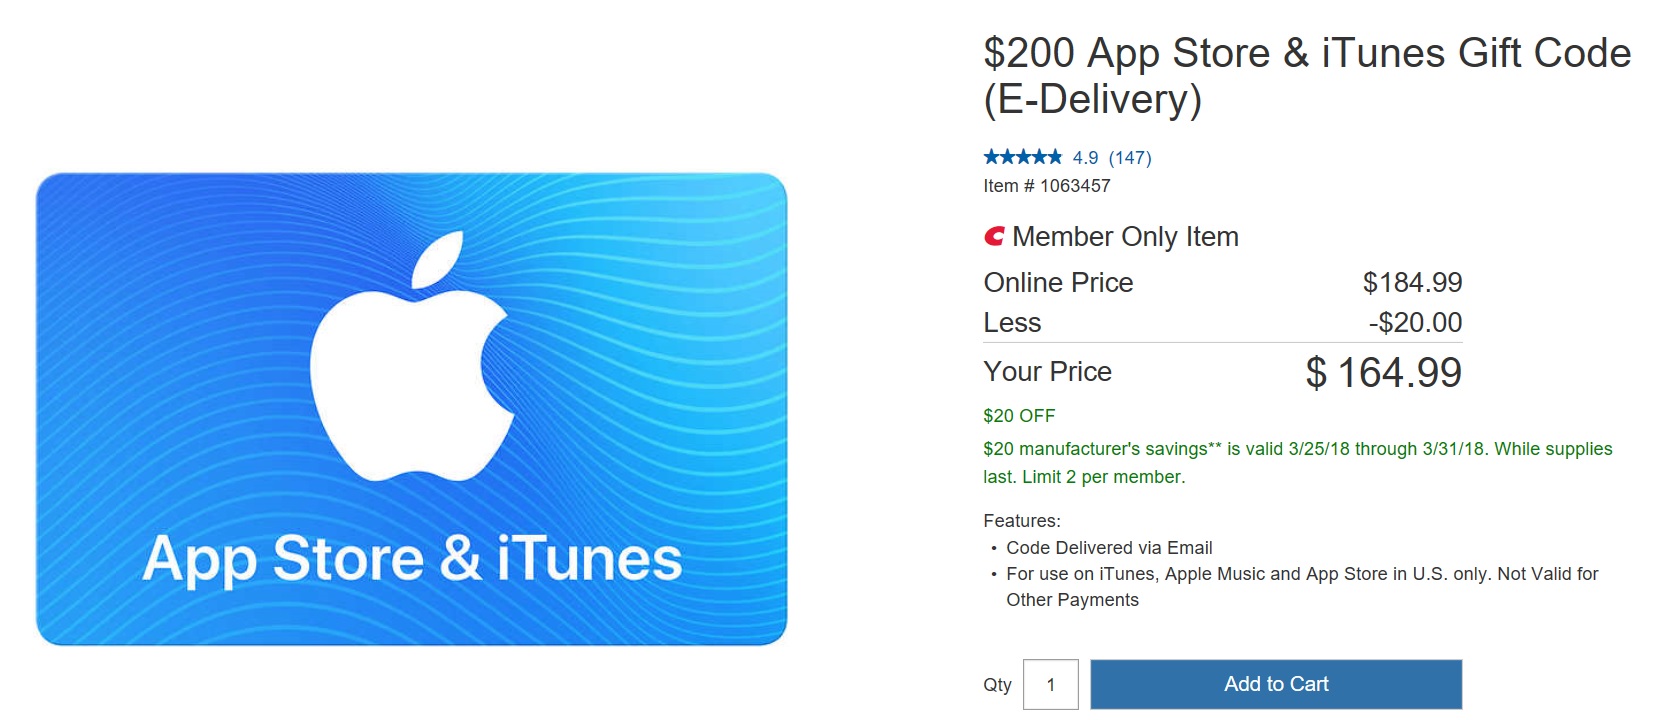 EXPIRED) $200 iTunes for $165 at Costco (should stack w/ $50 back on $250)